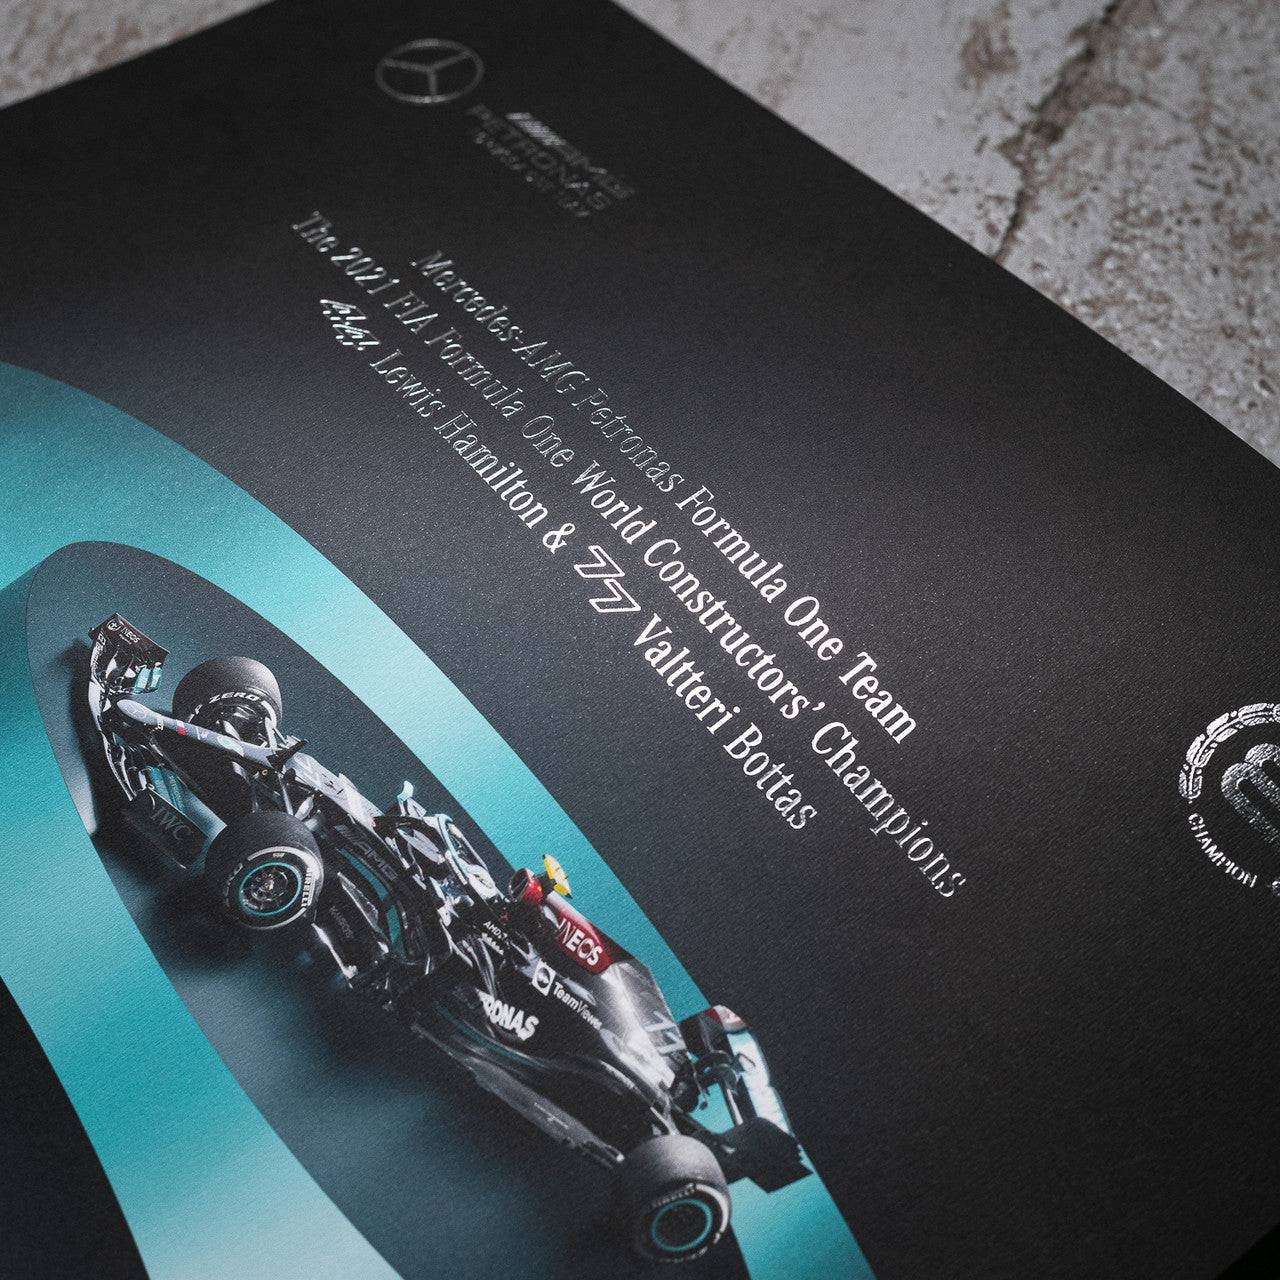 Mercedes-AMG Petronas F1 Team - 8 Titles | Collector’s Edition